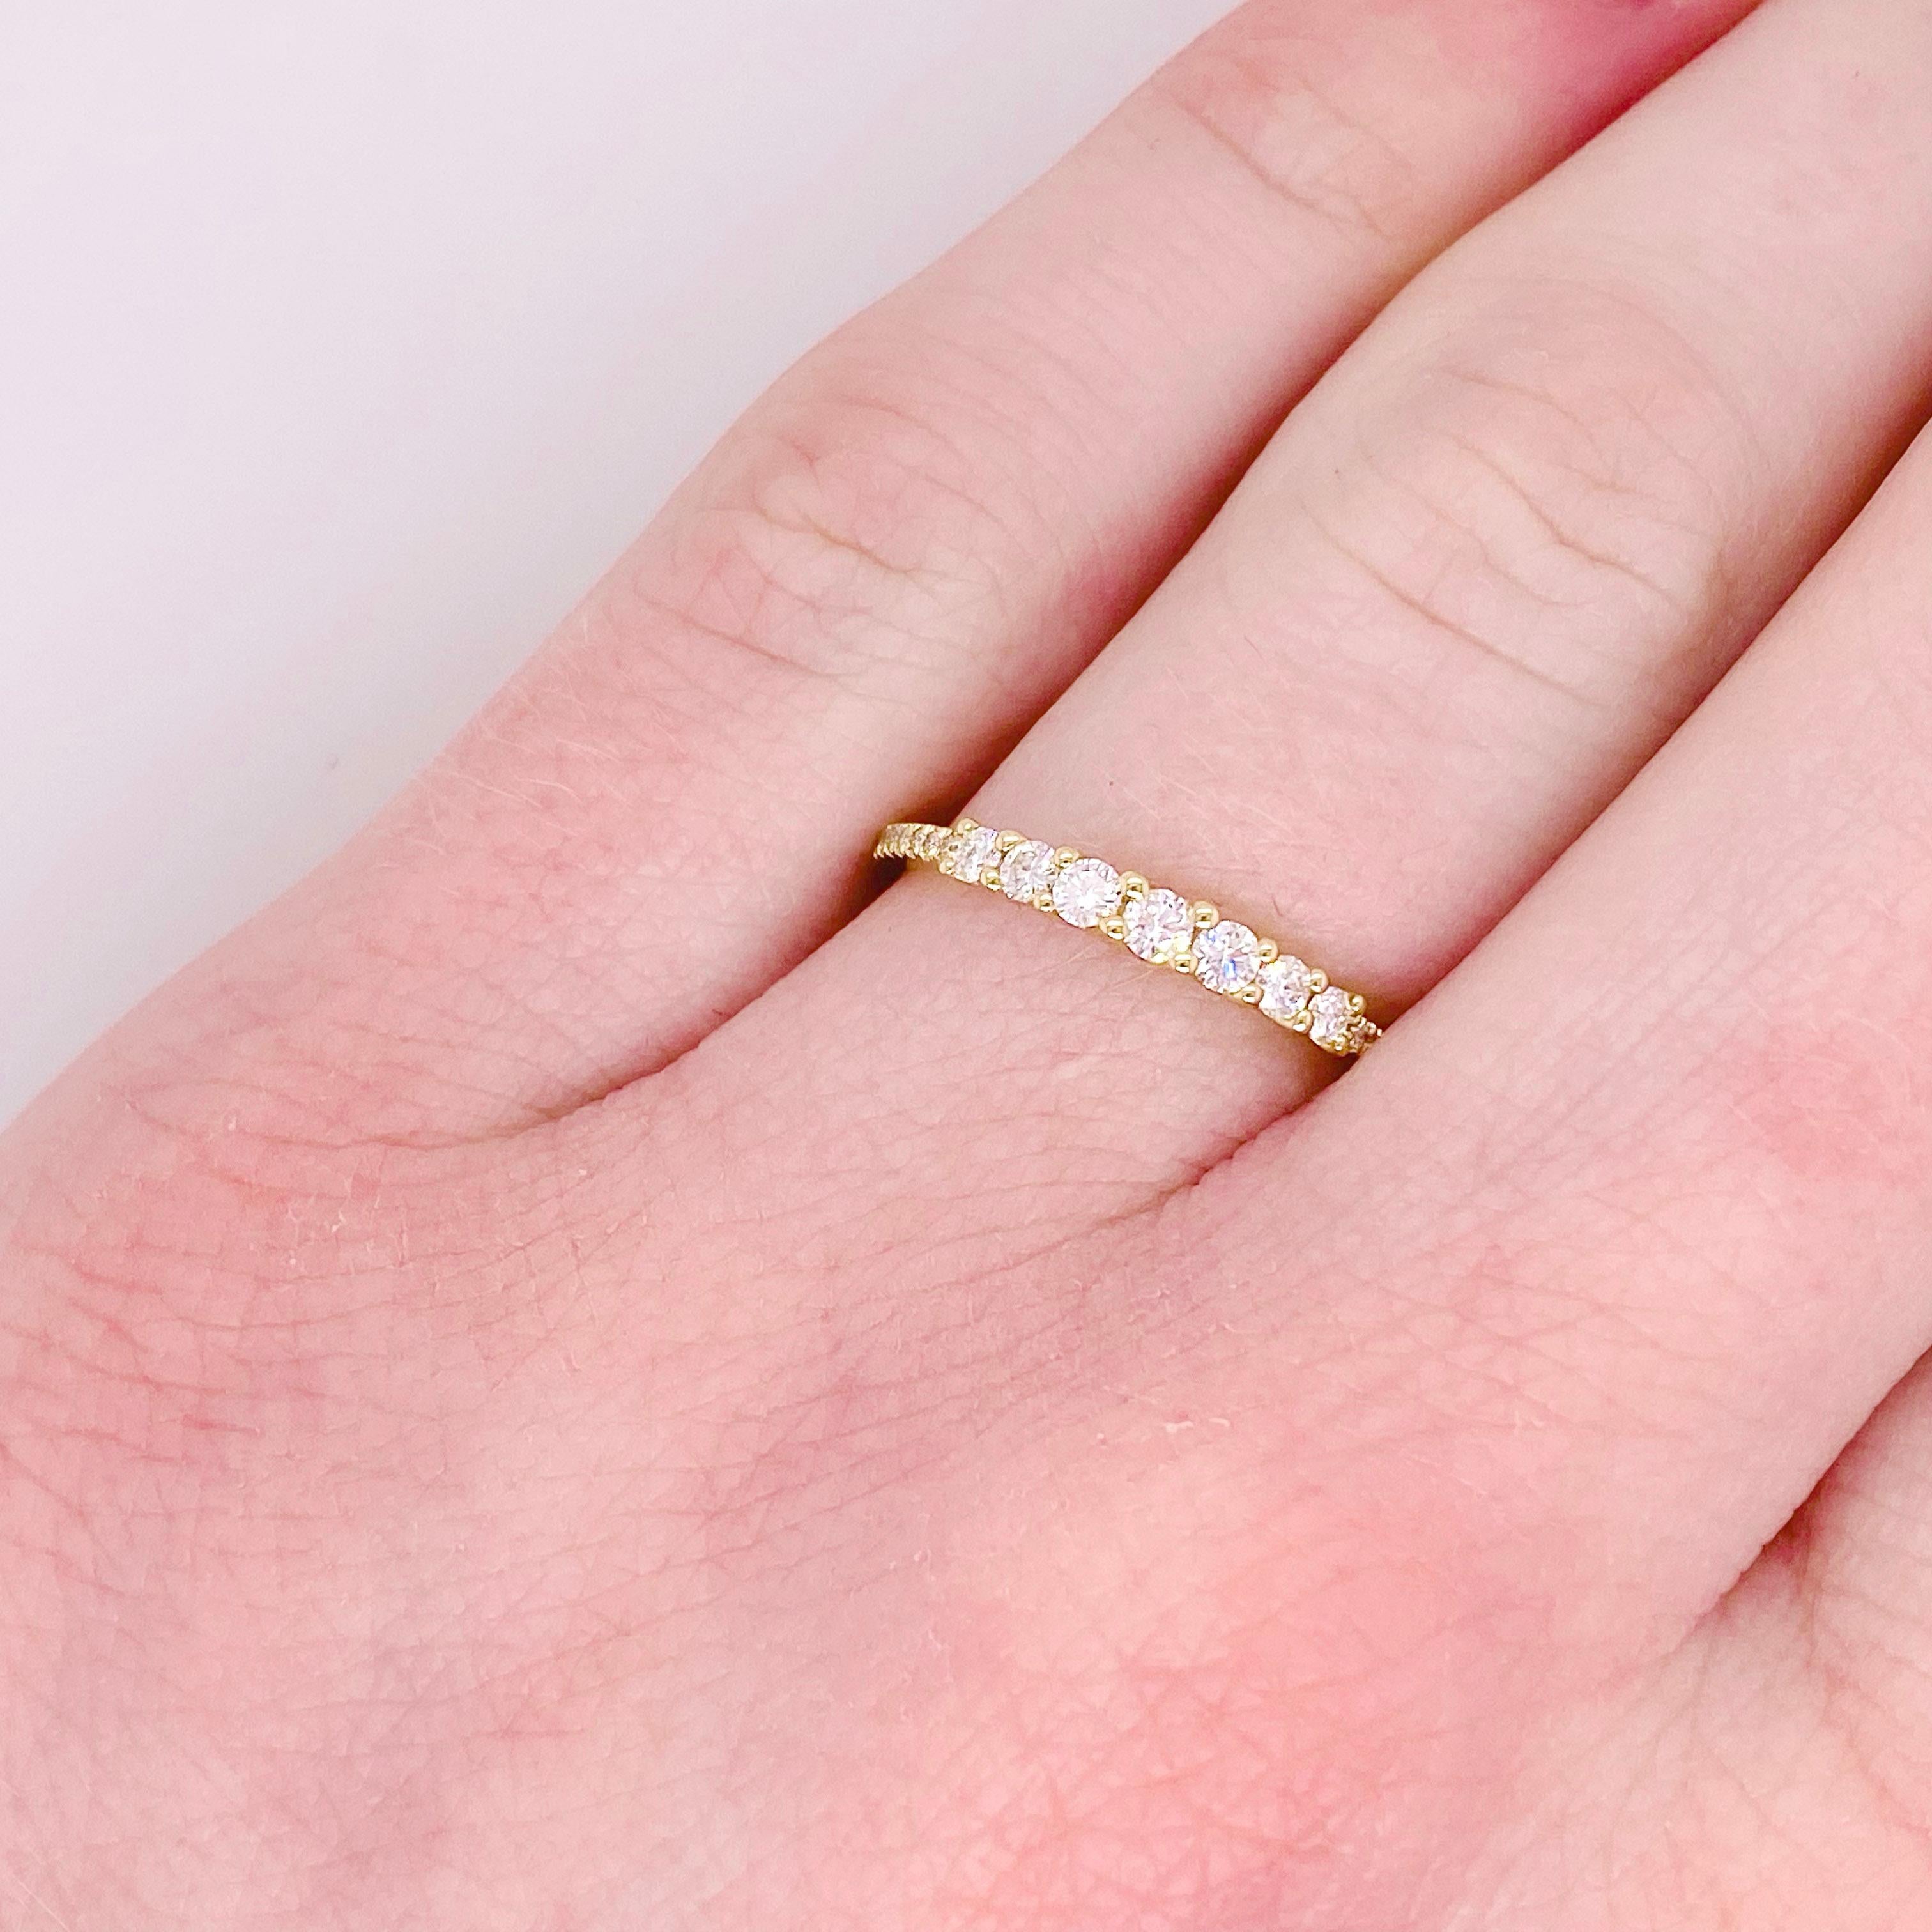 A classic straight diamond band, perfect for any occasion. This versatile band is perfect to highlight an engagement ring to add to a custom ring stack. The details for this beautiful ring are listed below:
Metal Quality: 14 karat Yellow Gold
Band